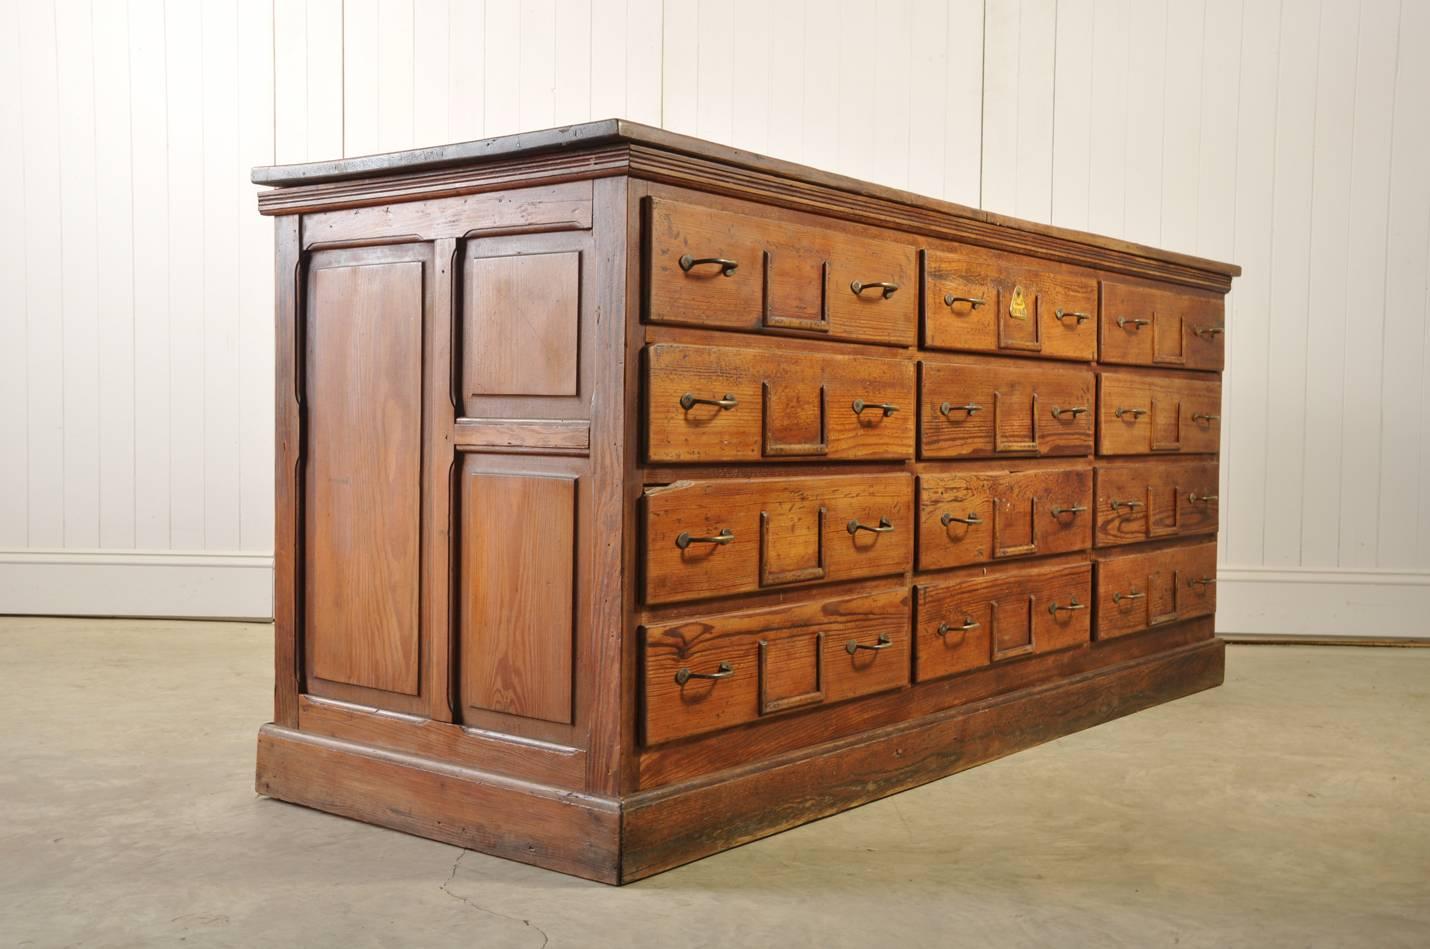 This sideboard was sourced from a grain store in mid France, circa 1900. 

Like many pieces of industrial furniture this has not only been used for filing, but also as a workbench over the years. You can see evidence of this with the marks,